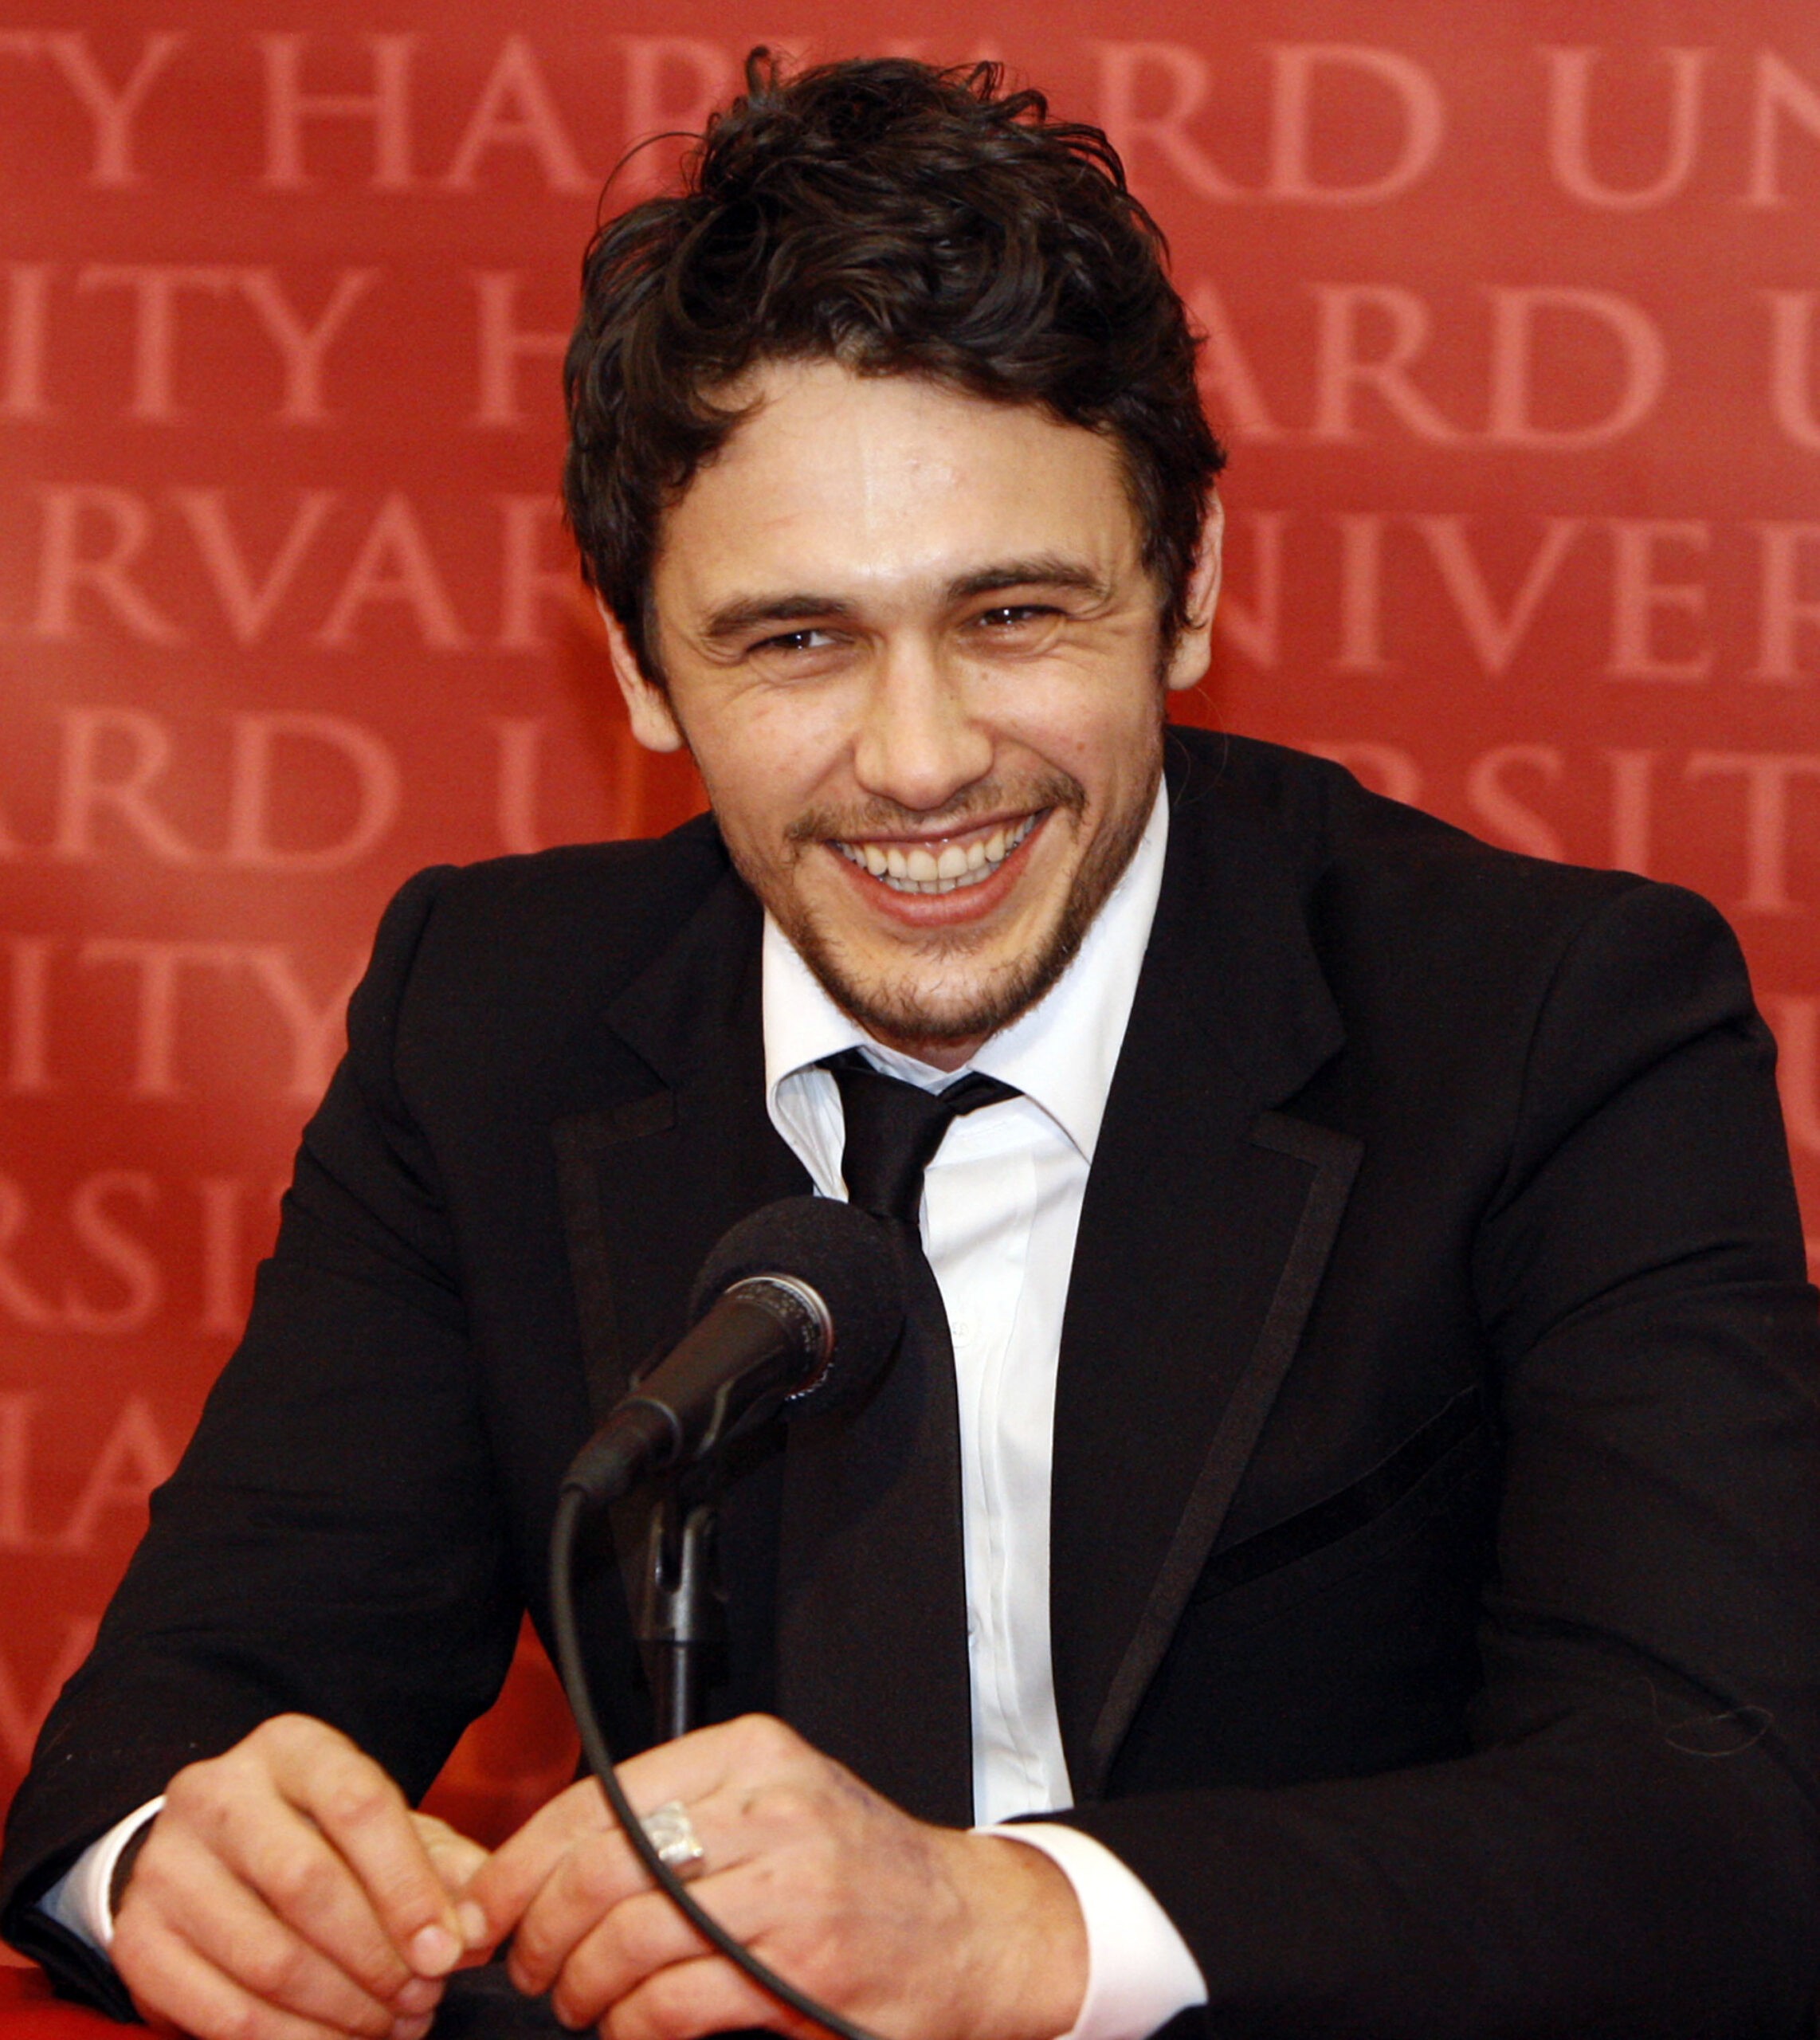 James Franco, Biography, Movies, TV Shows, & Facts